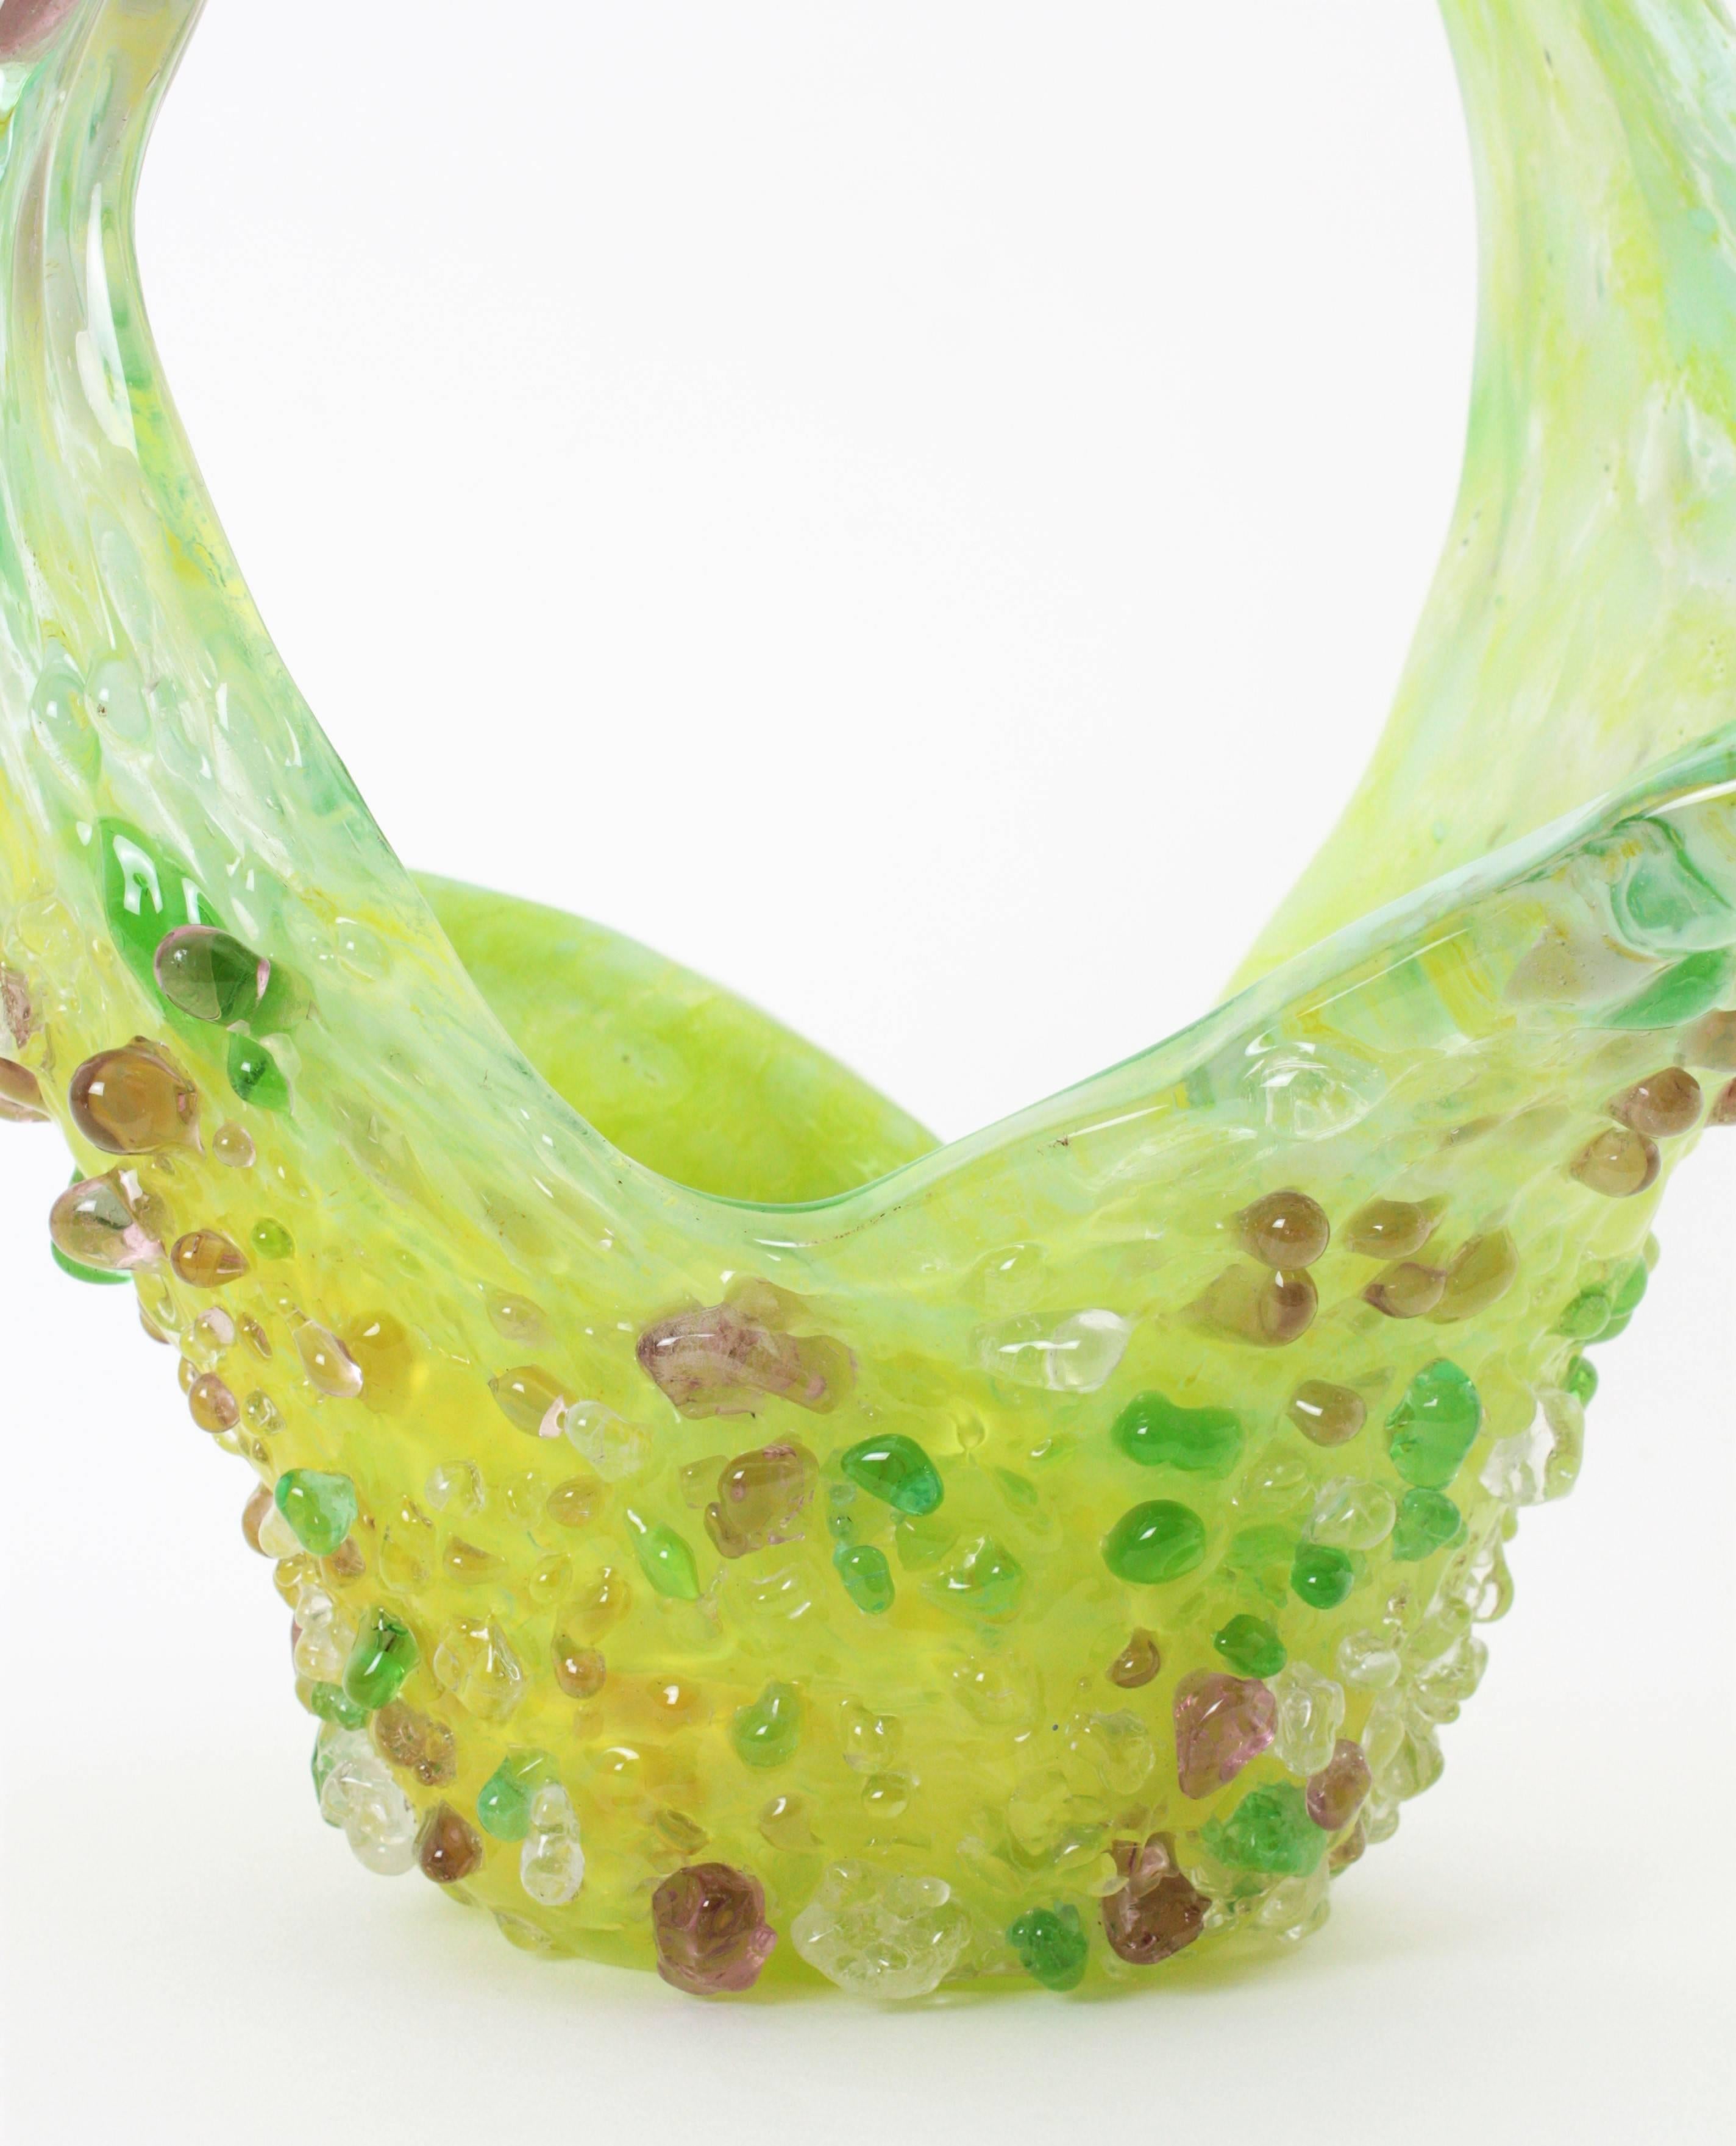 An unique and exceptional Murano art glass piece in fresh lime green, mint green and yellow colors with basket shape. This vase has a colorful external decoration with mauve, green, yellow and clear applied glass drops. 
Italy, 1950s.

Avaliable